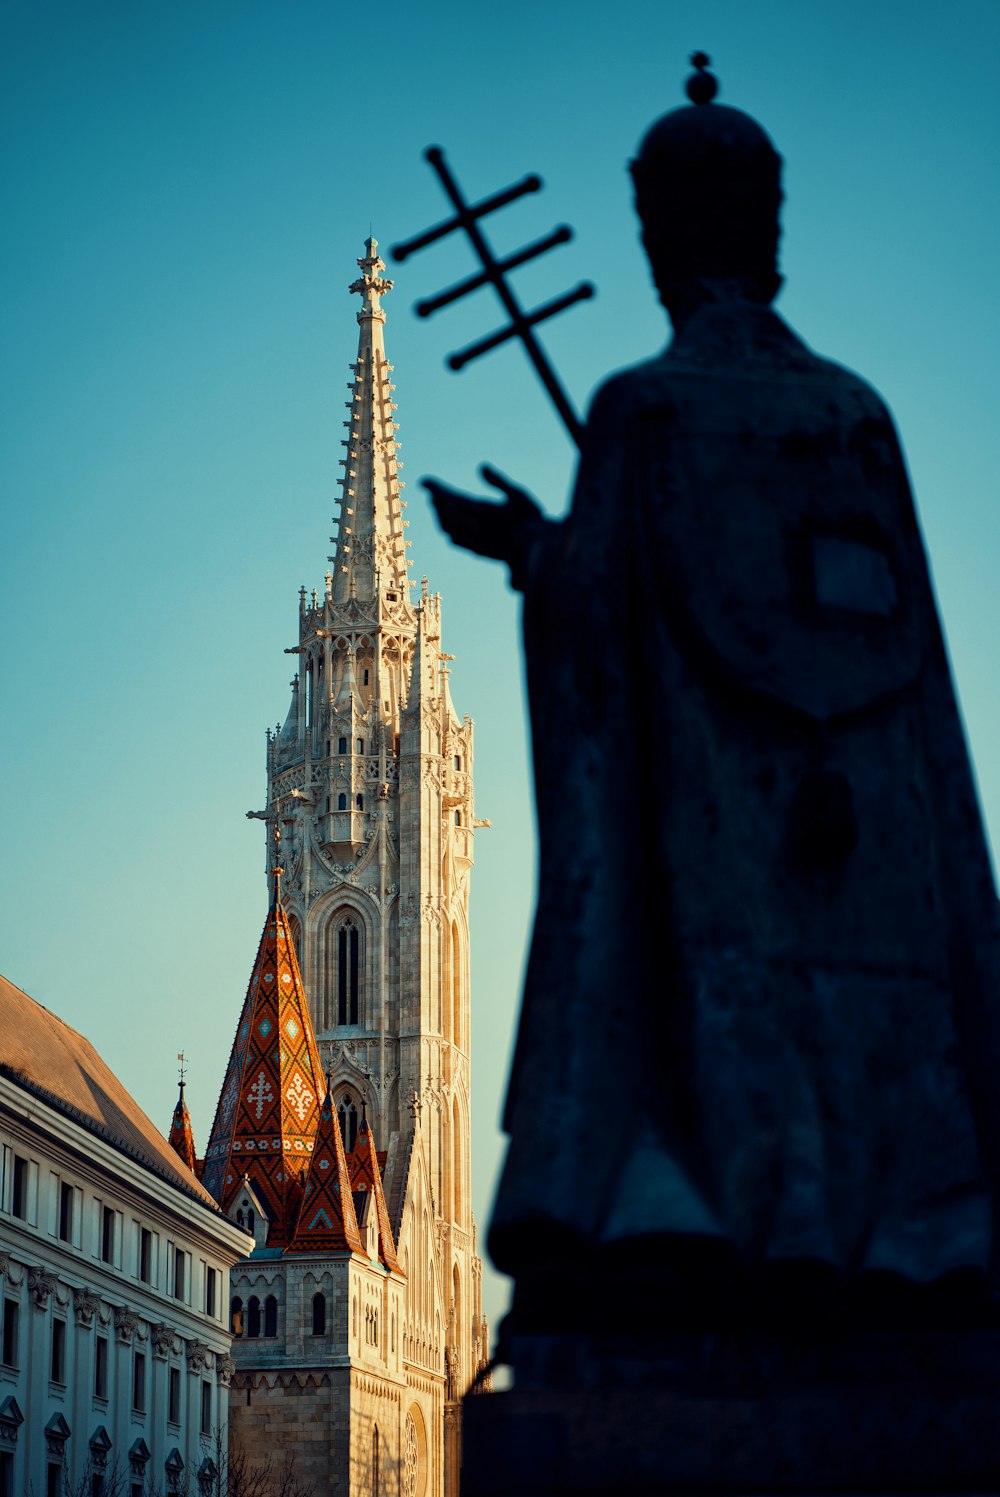 a statue of a person holding a cross in front of a tall building